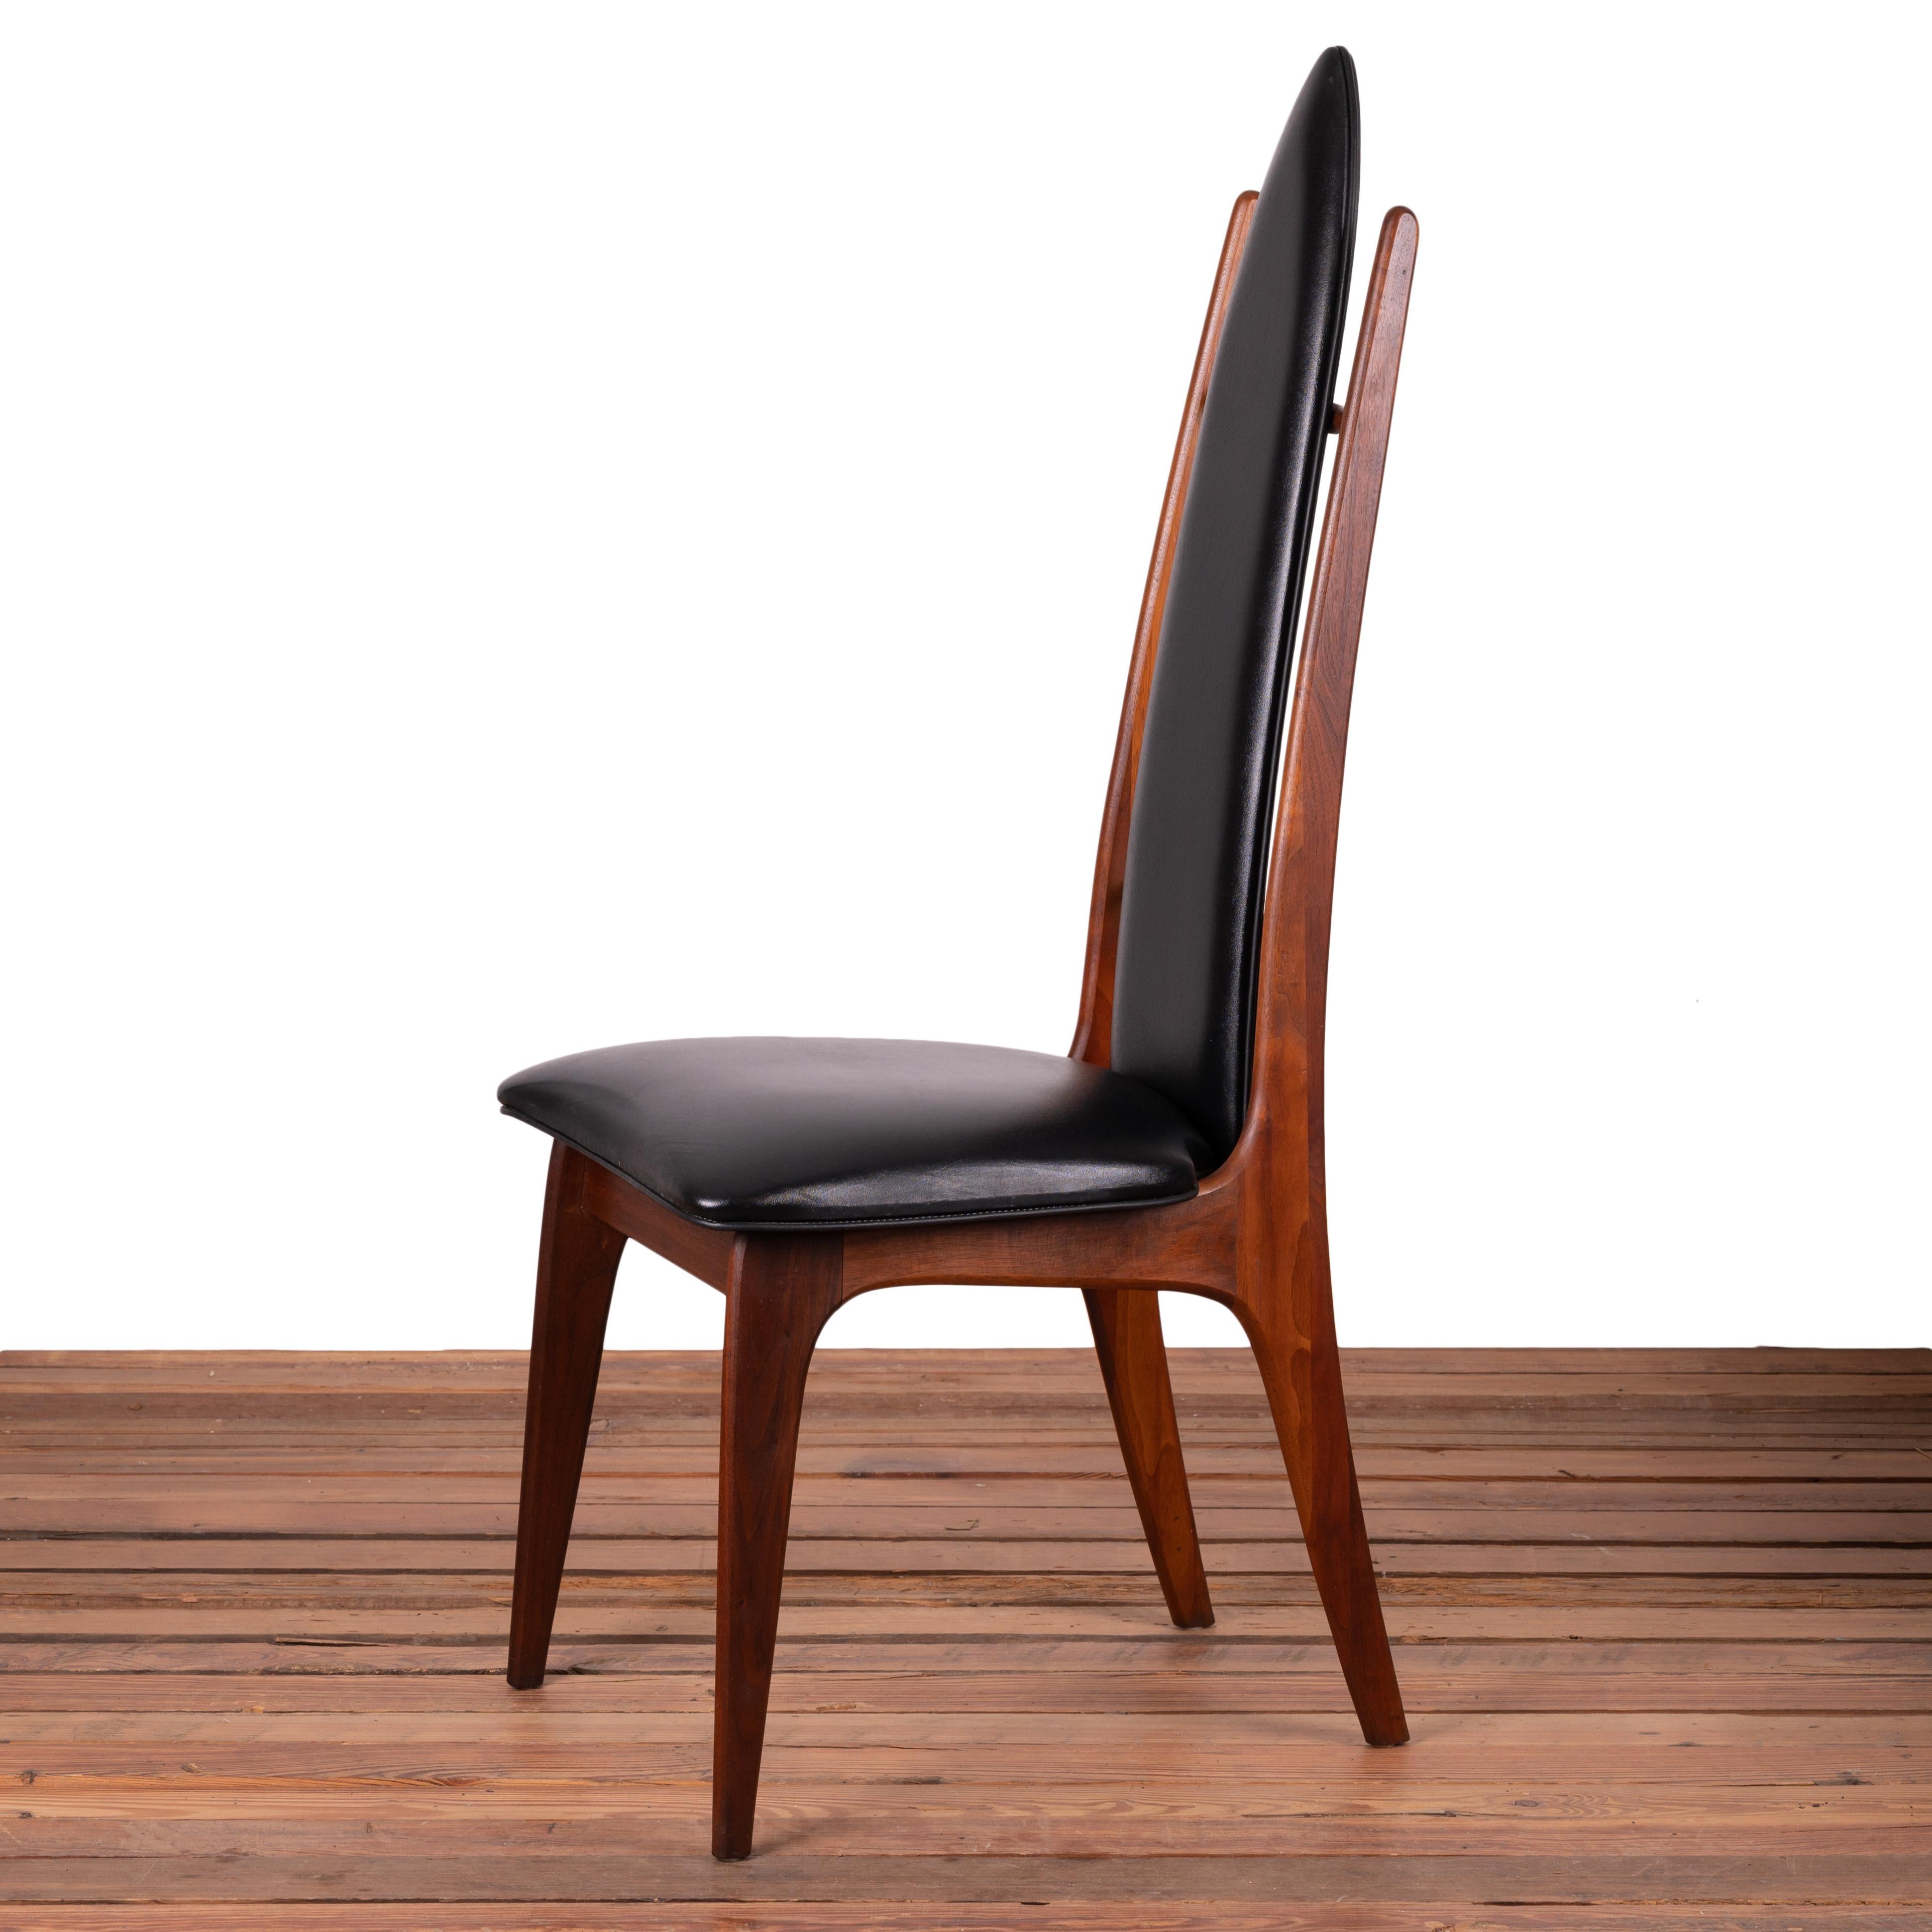 A set of 4 dining chairs in the manner of Adrian Pearsall, mid-20th century.

Walnut with black vinyl upholstery.

17 ½ inches wide by 22 inches deep by 46 ¼ inches tall

